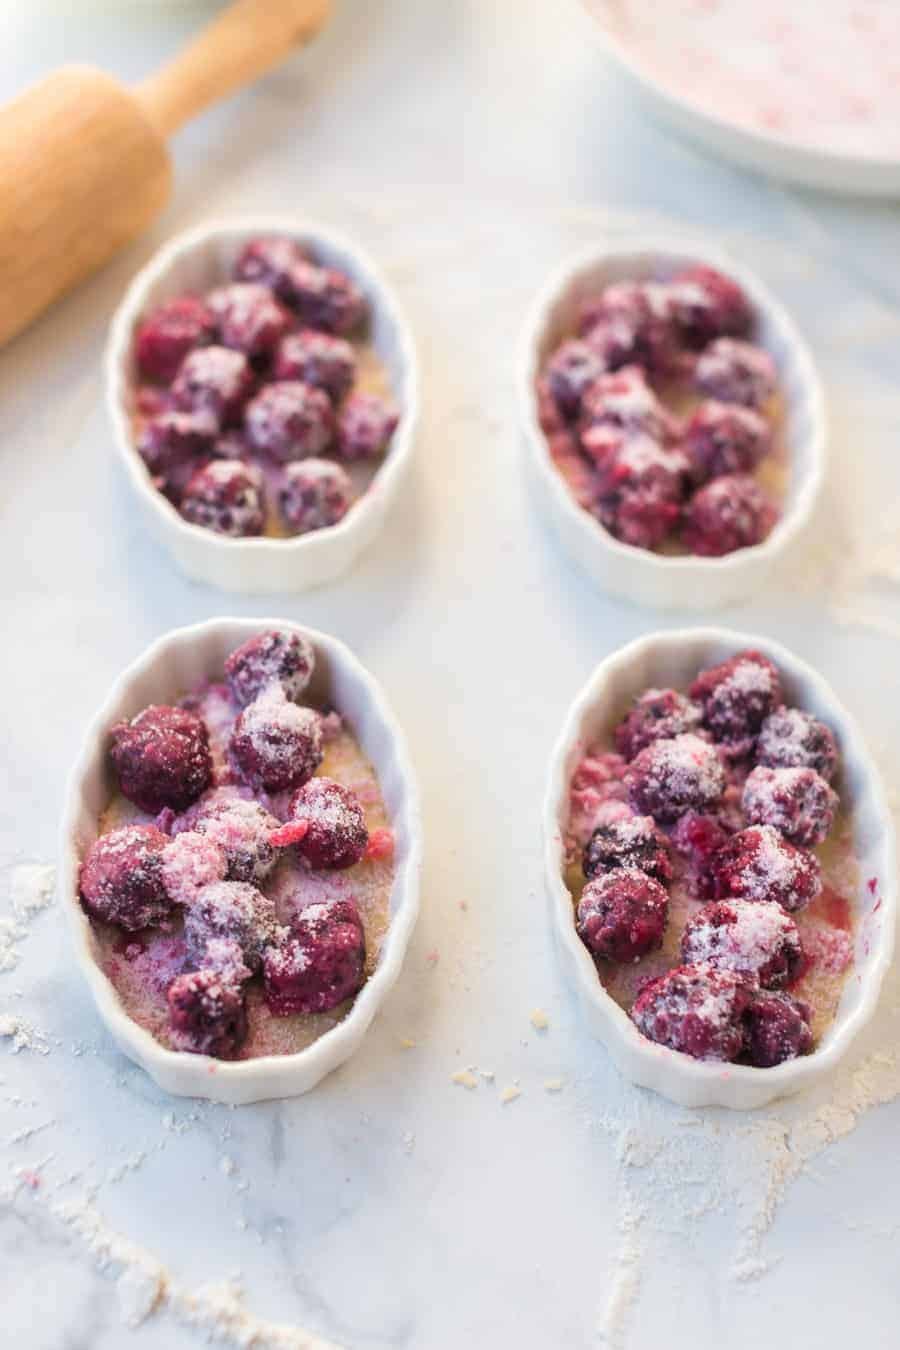 Raspberry cobbler made with black raspberries and a flaky pie crust is a favorite family dessert passed down by my grandmother. #raspberrycobbler #cobbler #raspberry #dessert #baking #familyrecipe